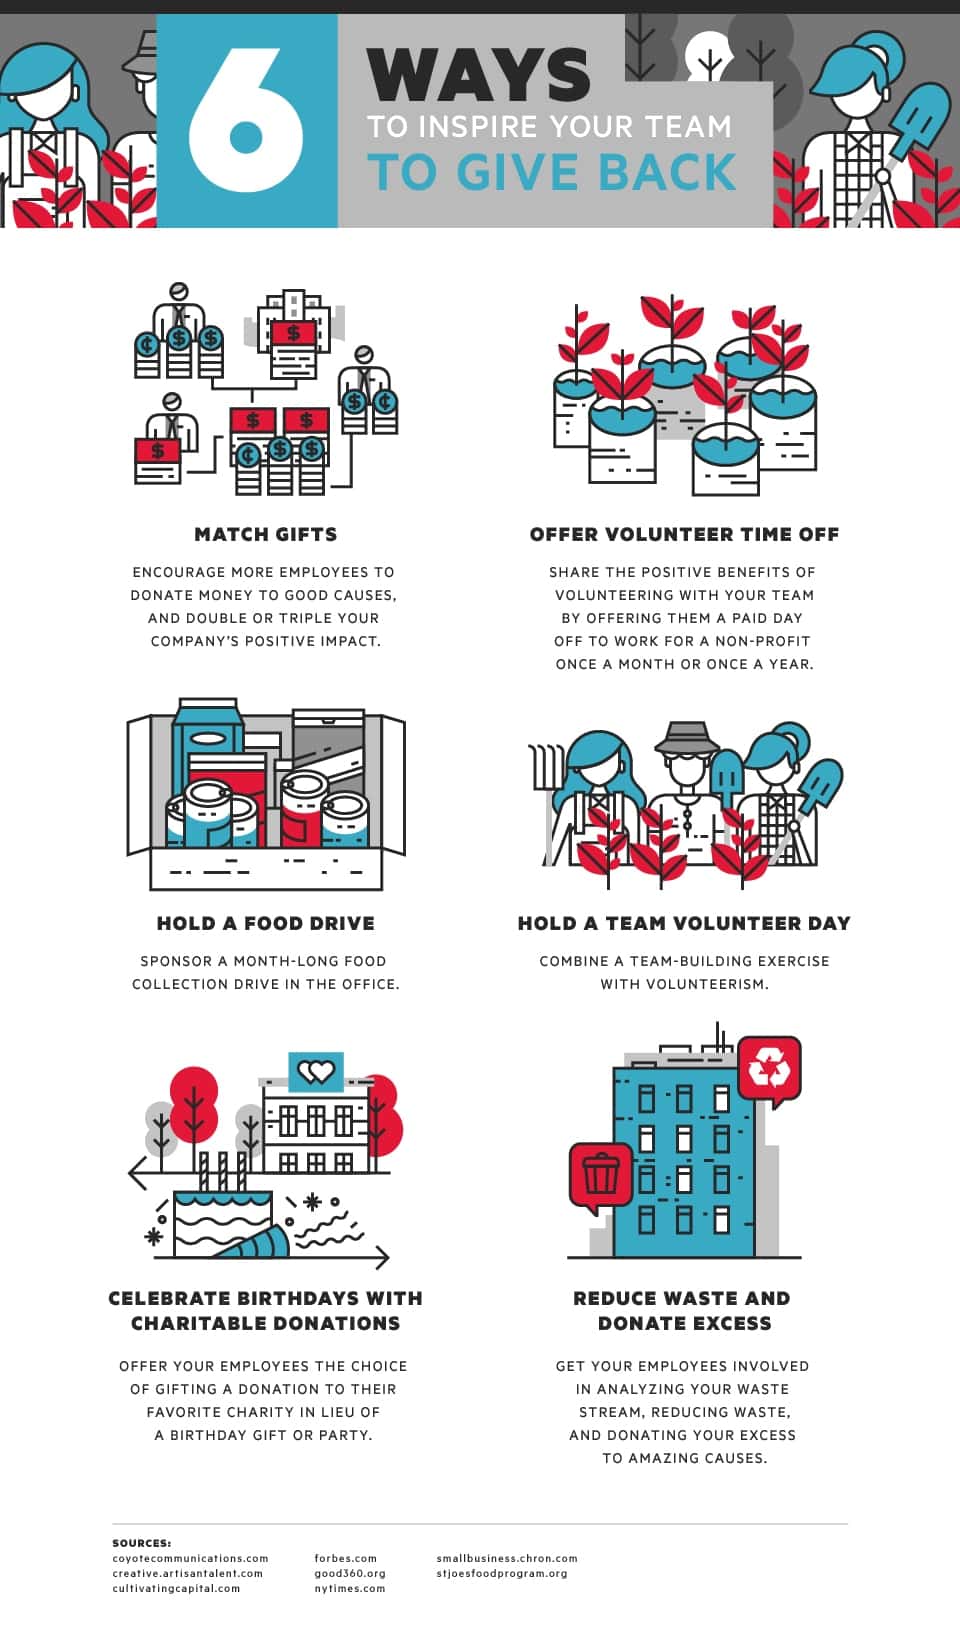 Ways to Inspire Your Employees to Give Back